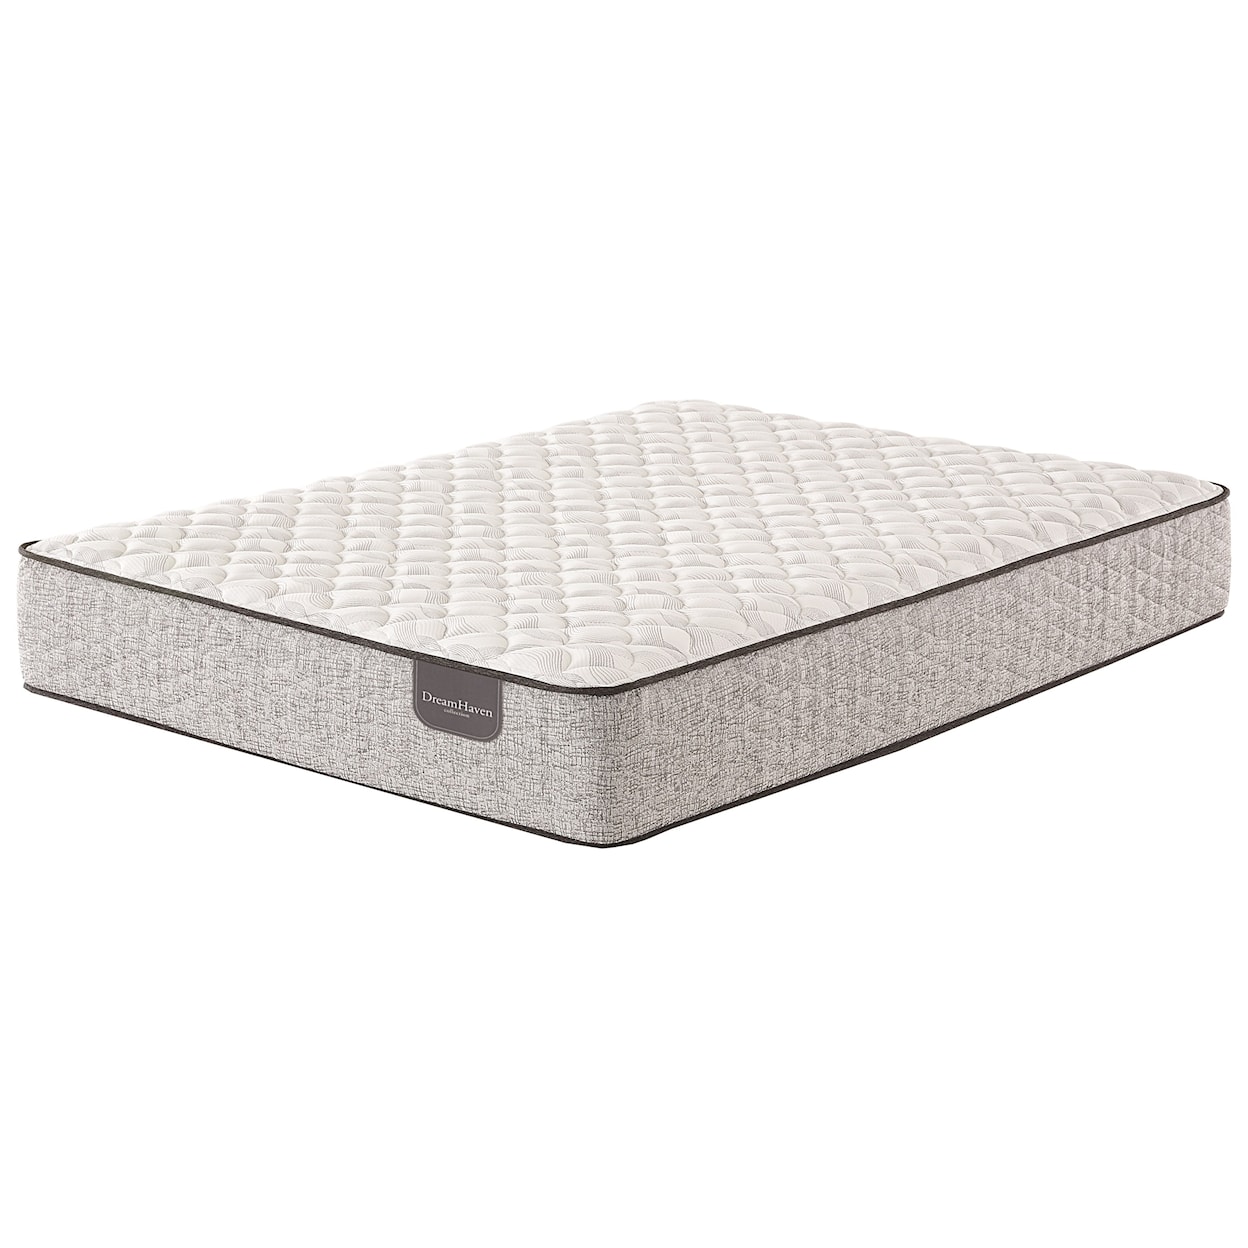 Serta Crystal Downs Firm Cal King Pocketed Coil Mattress